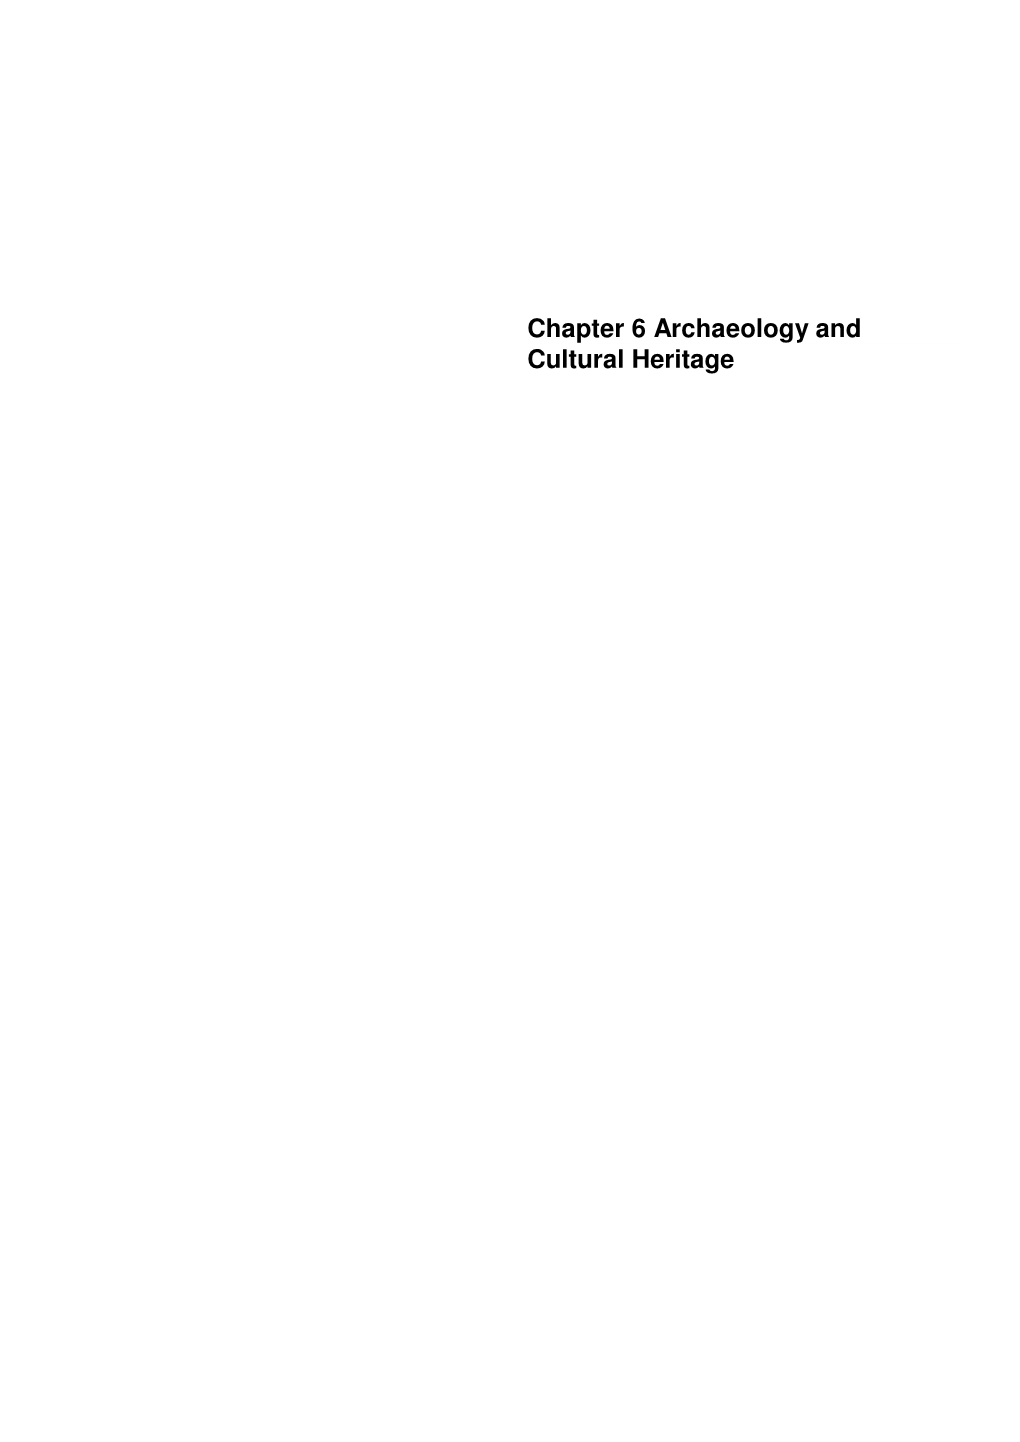 Chapter 6 Archaeology and Cultural Heritage